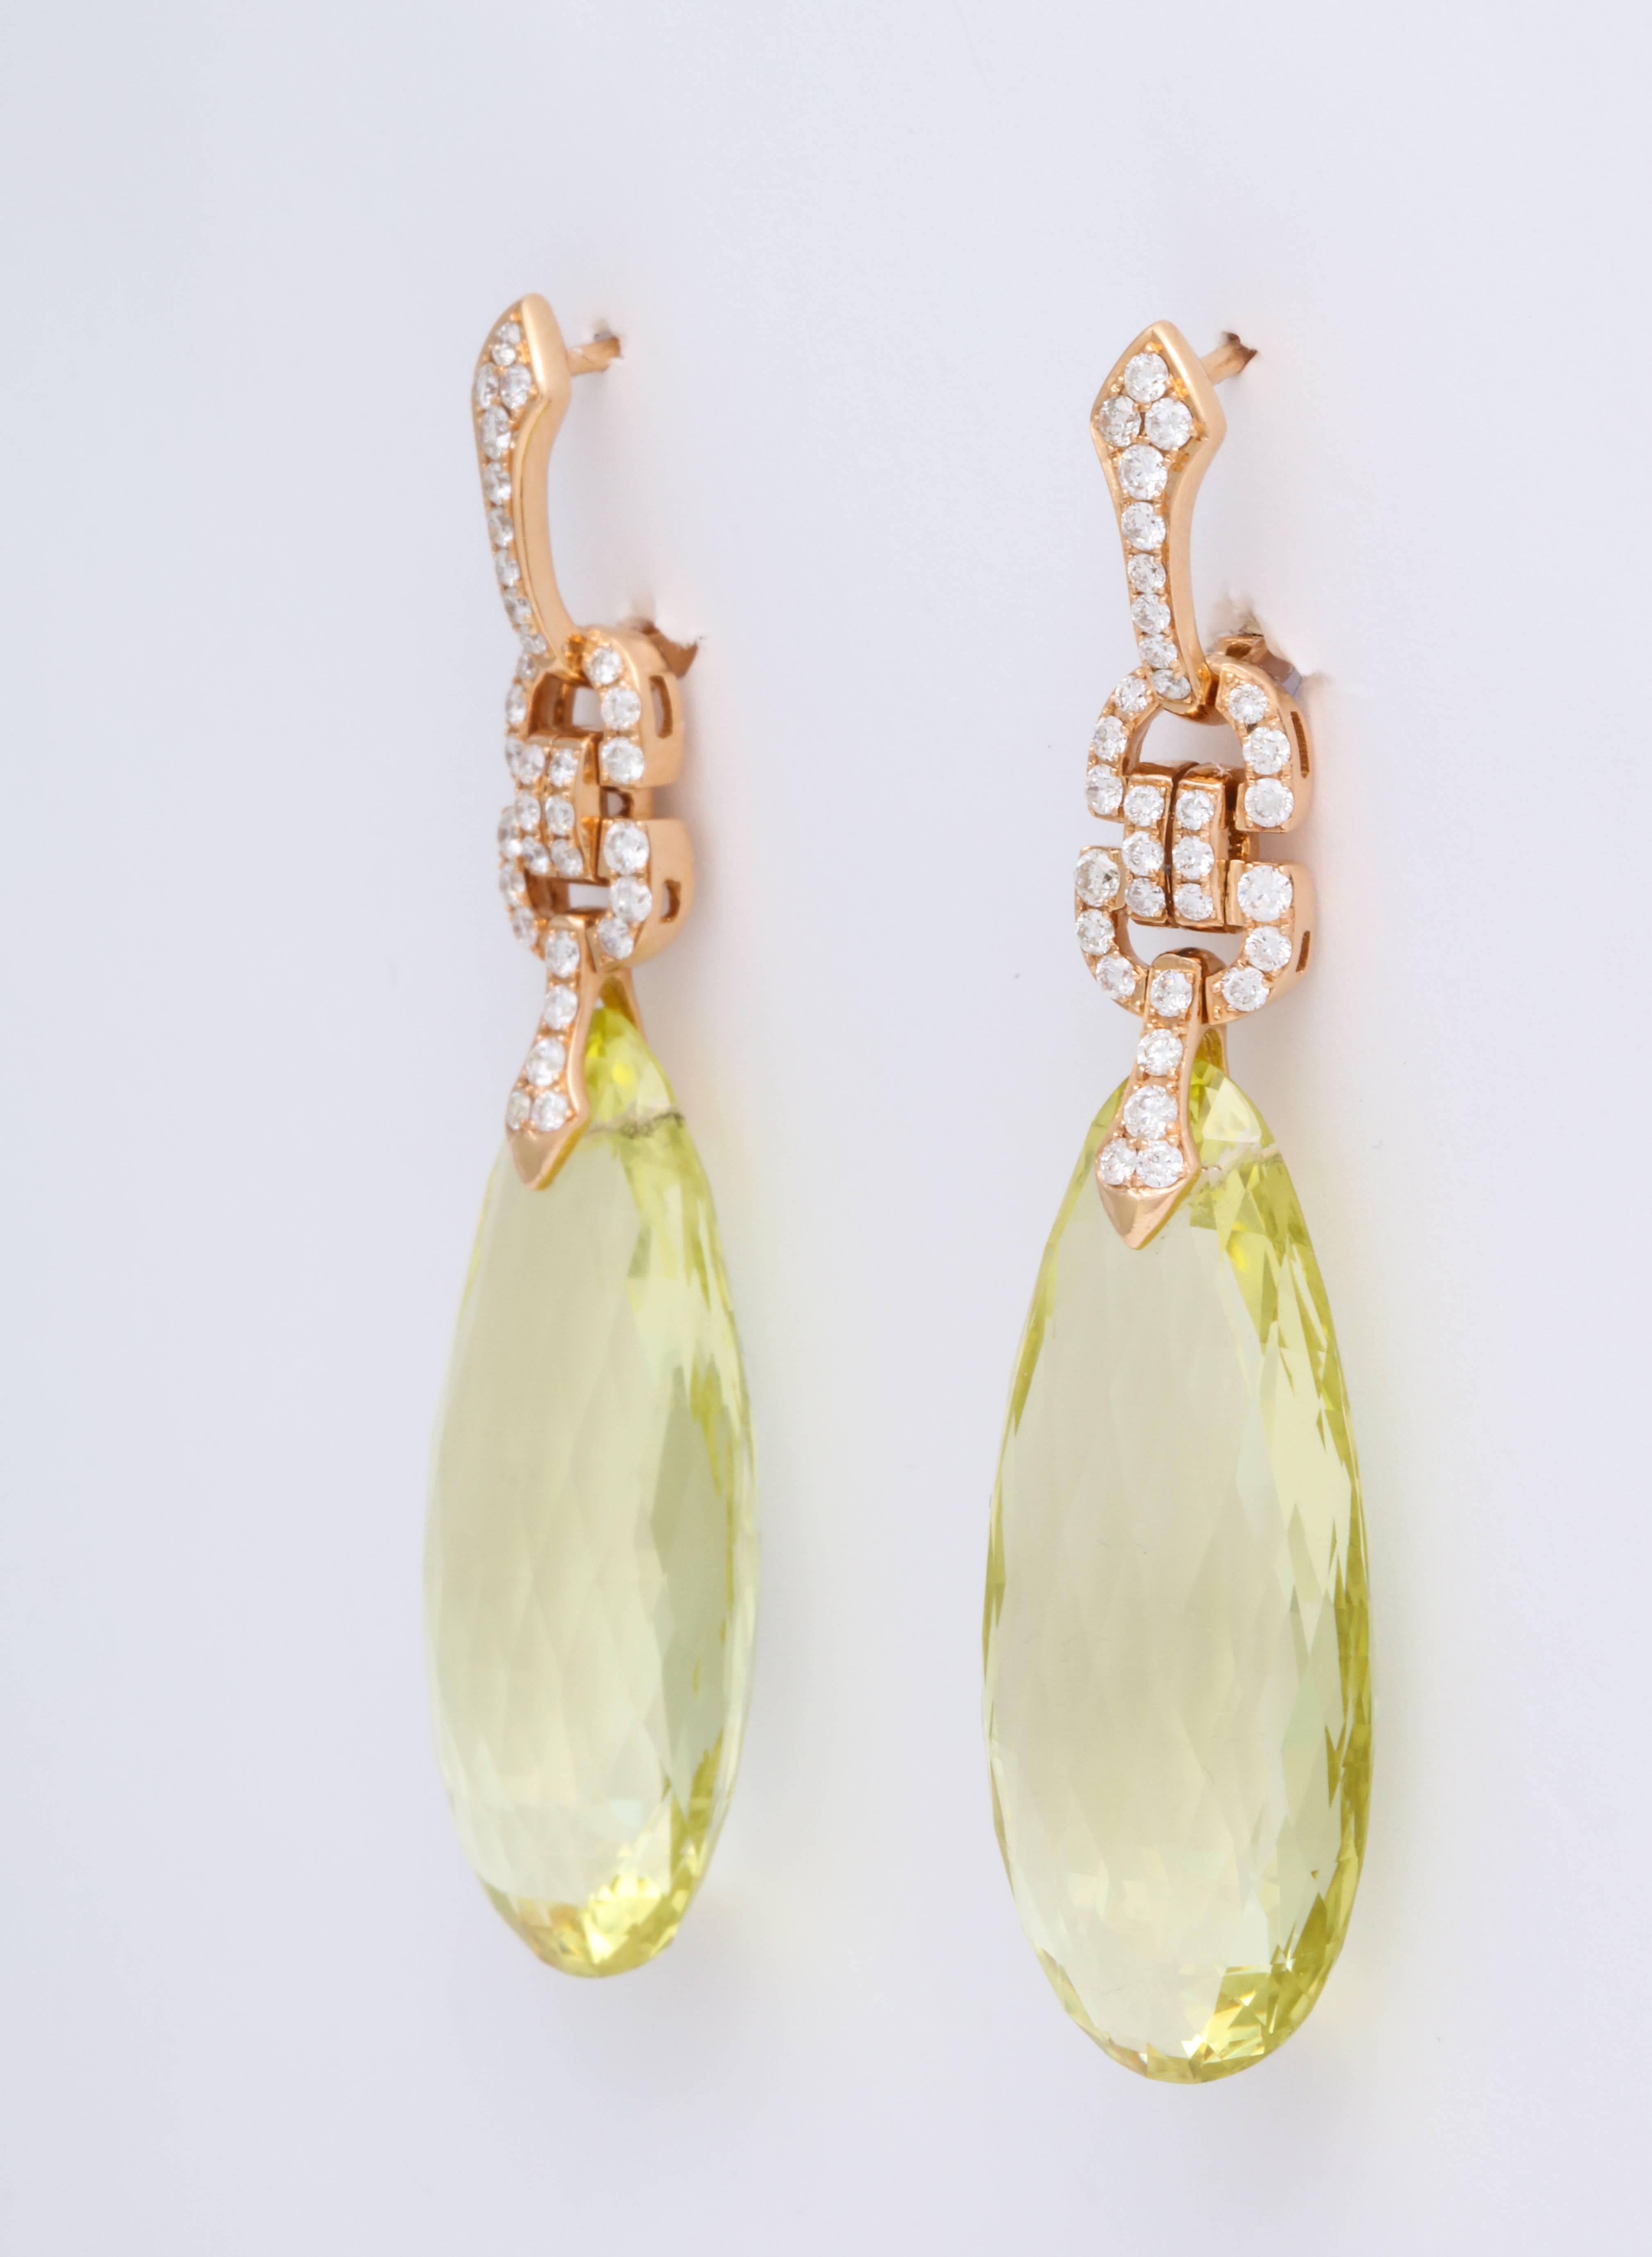 Swinging lemon quartz briolette pendants weighing 52.58 carats suspended from stylized art-deco motifs decorated with round brilliant cut diamonds weighing 0.85 carats set in 18K rose gold.